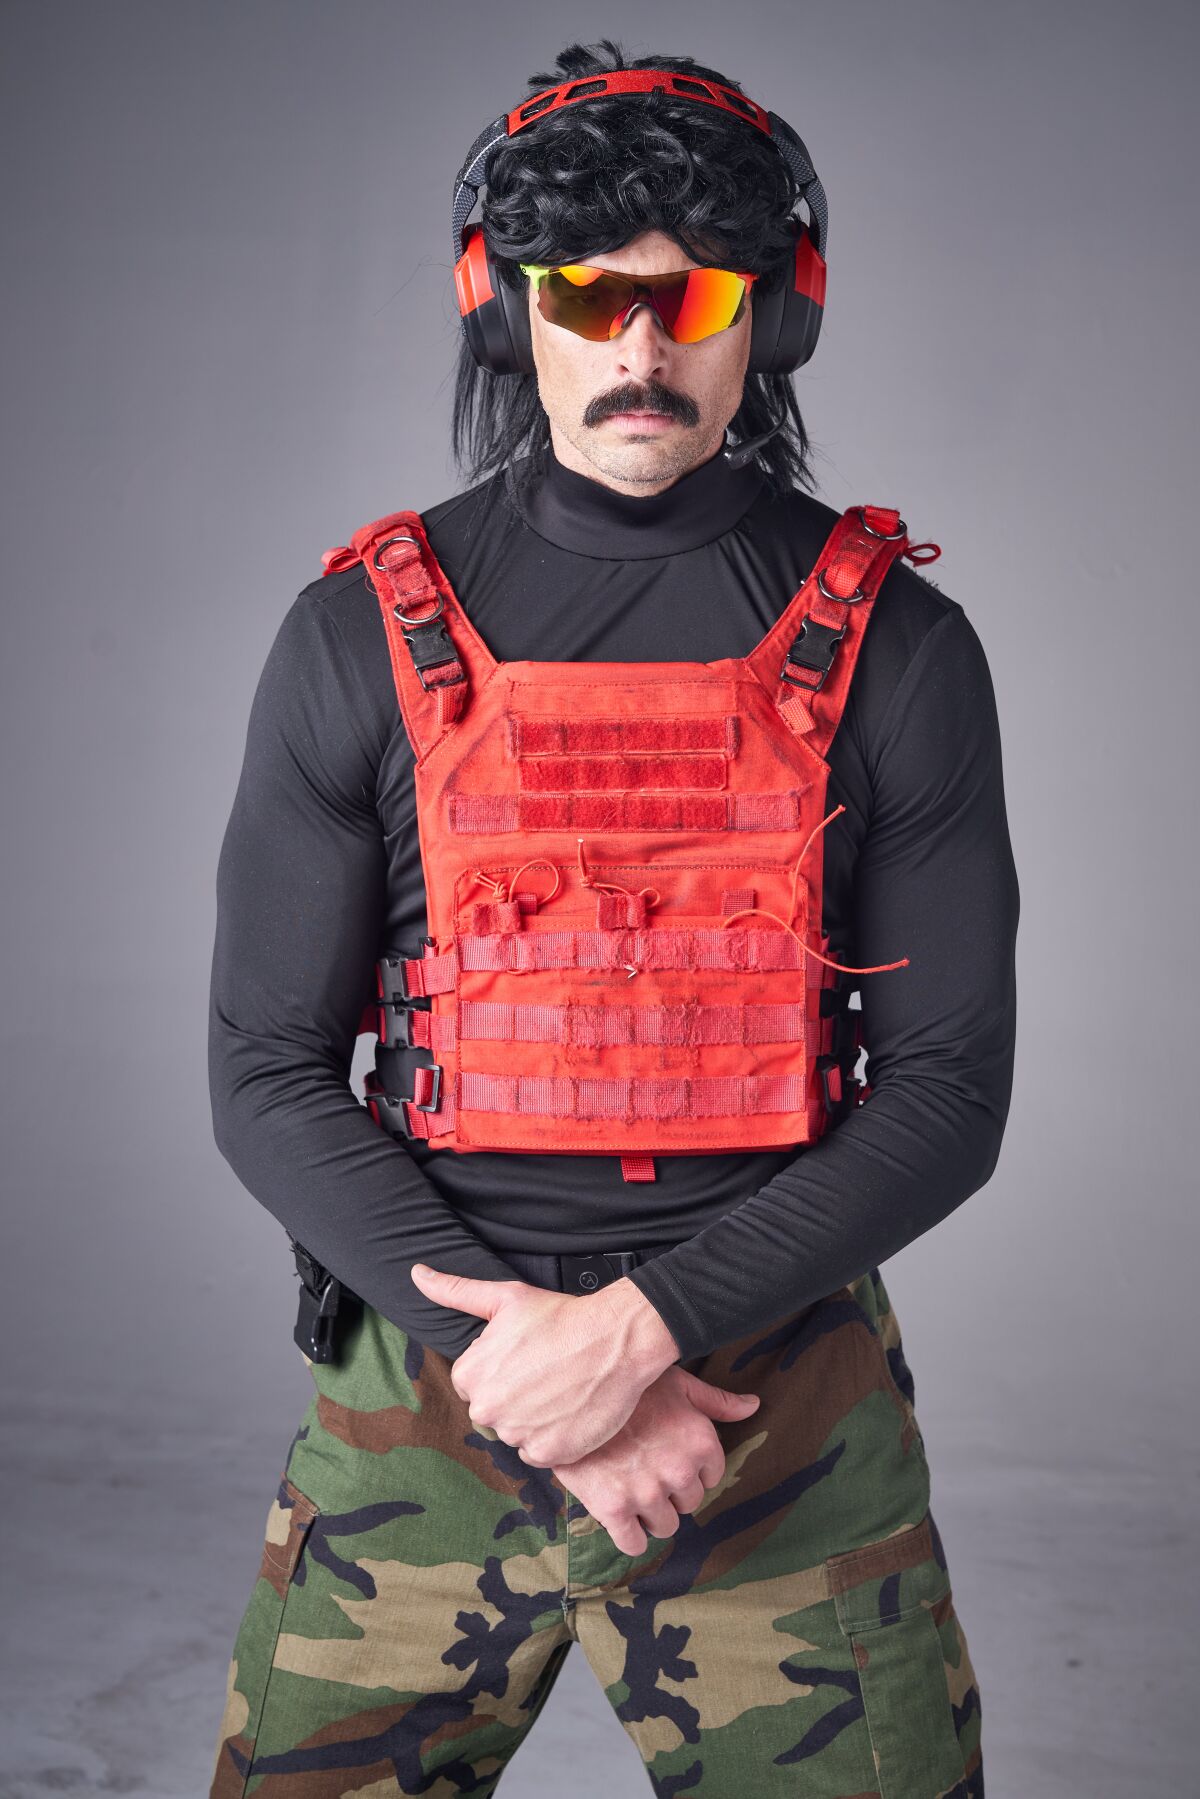 Guy "Dr Disrespect" Beahm is 6-foot, 8-inches tall, wears a mullet, headphones and sunglasses while he streams to his 4 million Twitch followers.